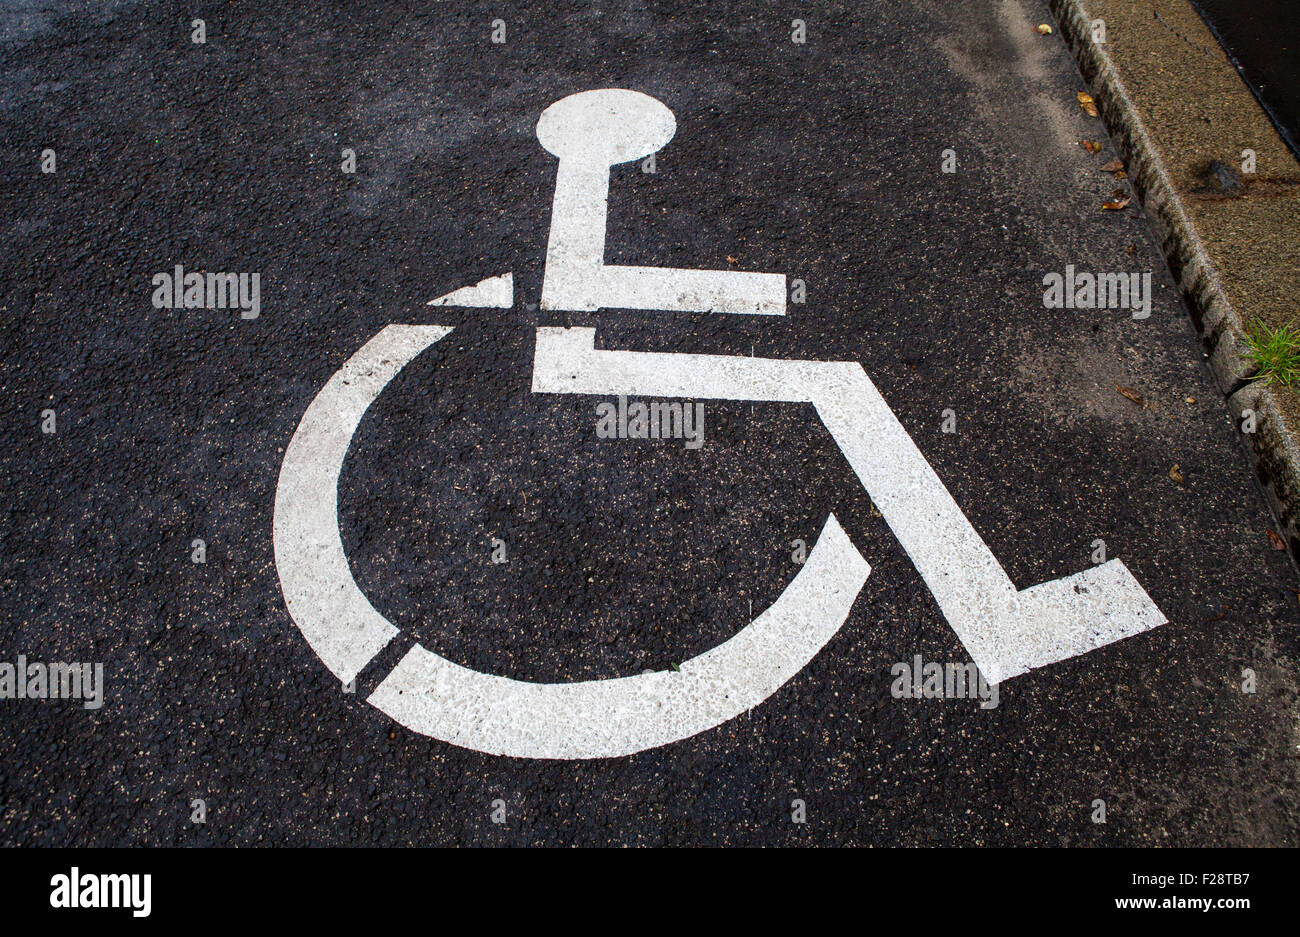 A Disabled Parking Space. Stock Photo